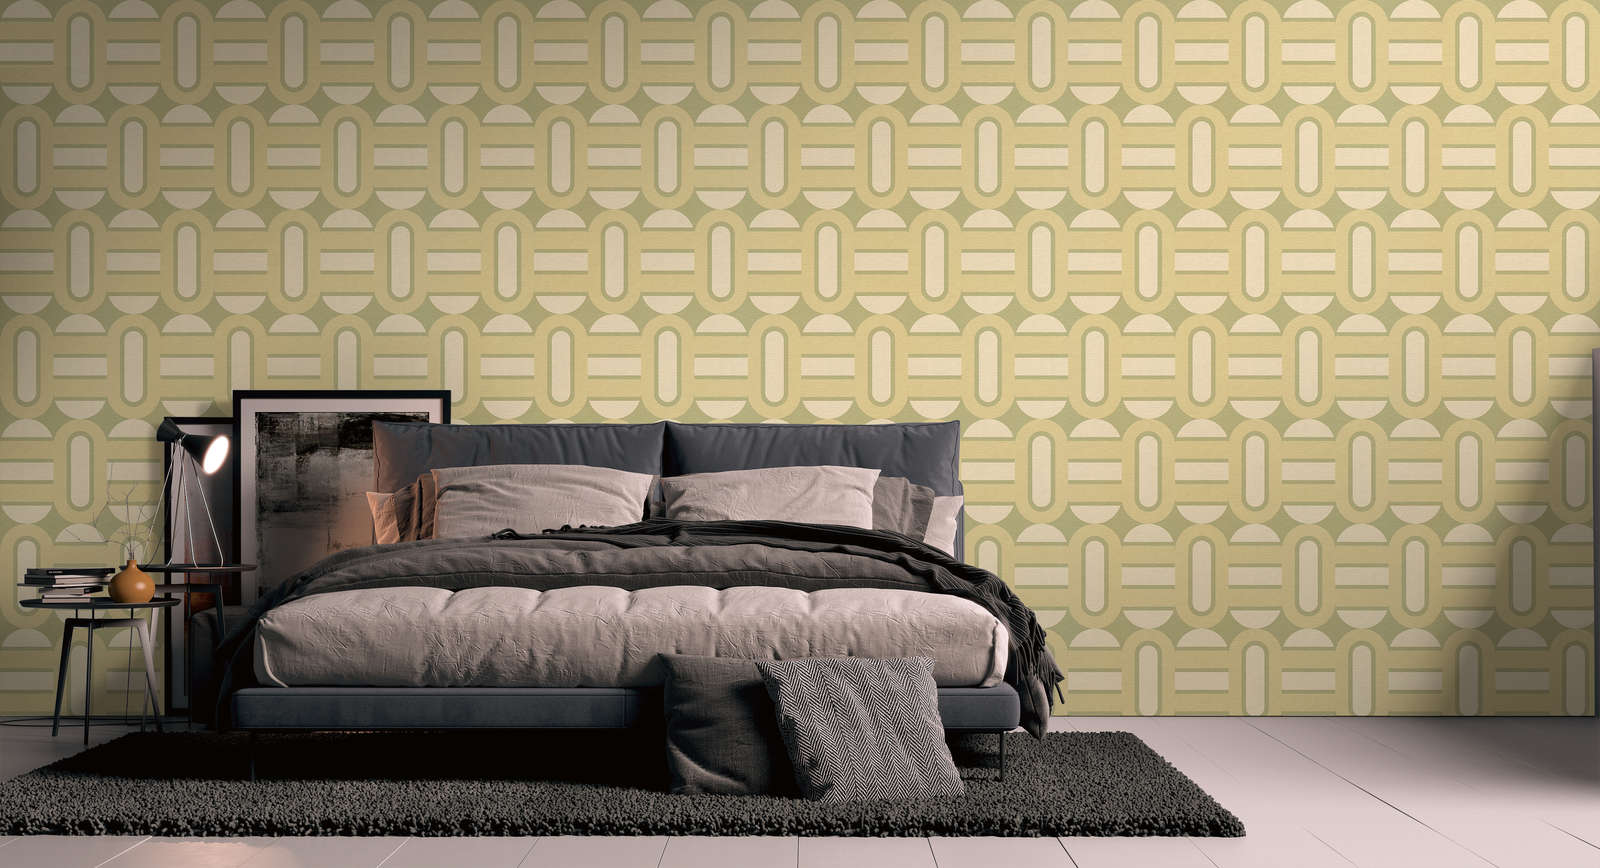             Non-woven wallpaper in retro style patterned with ovals and bars - green, cream
        